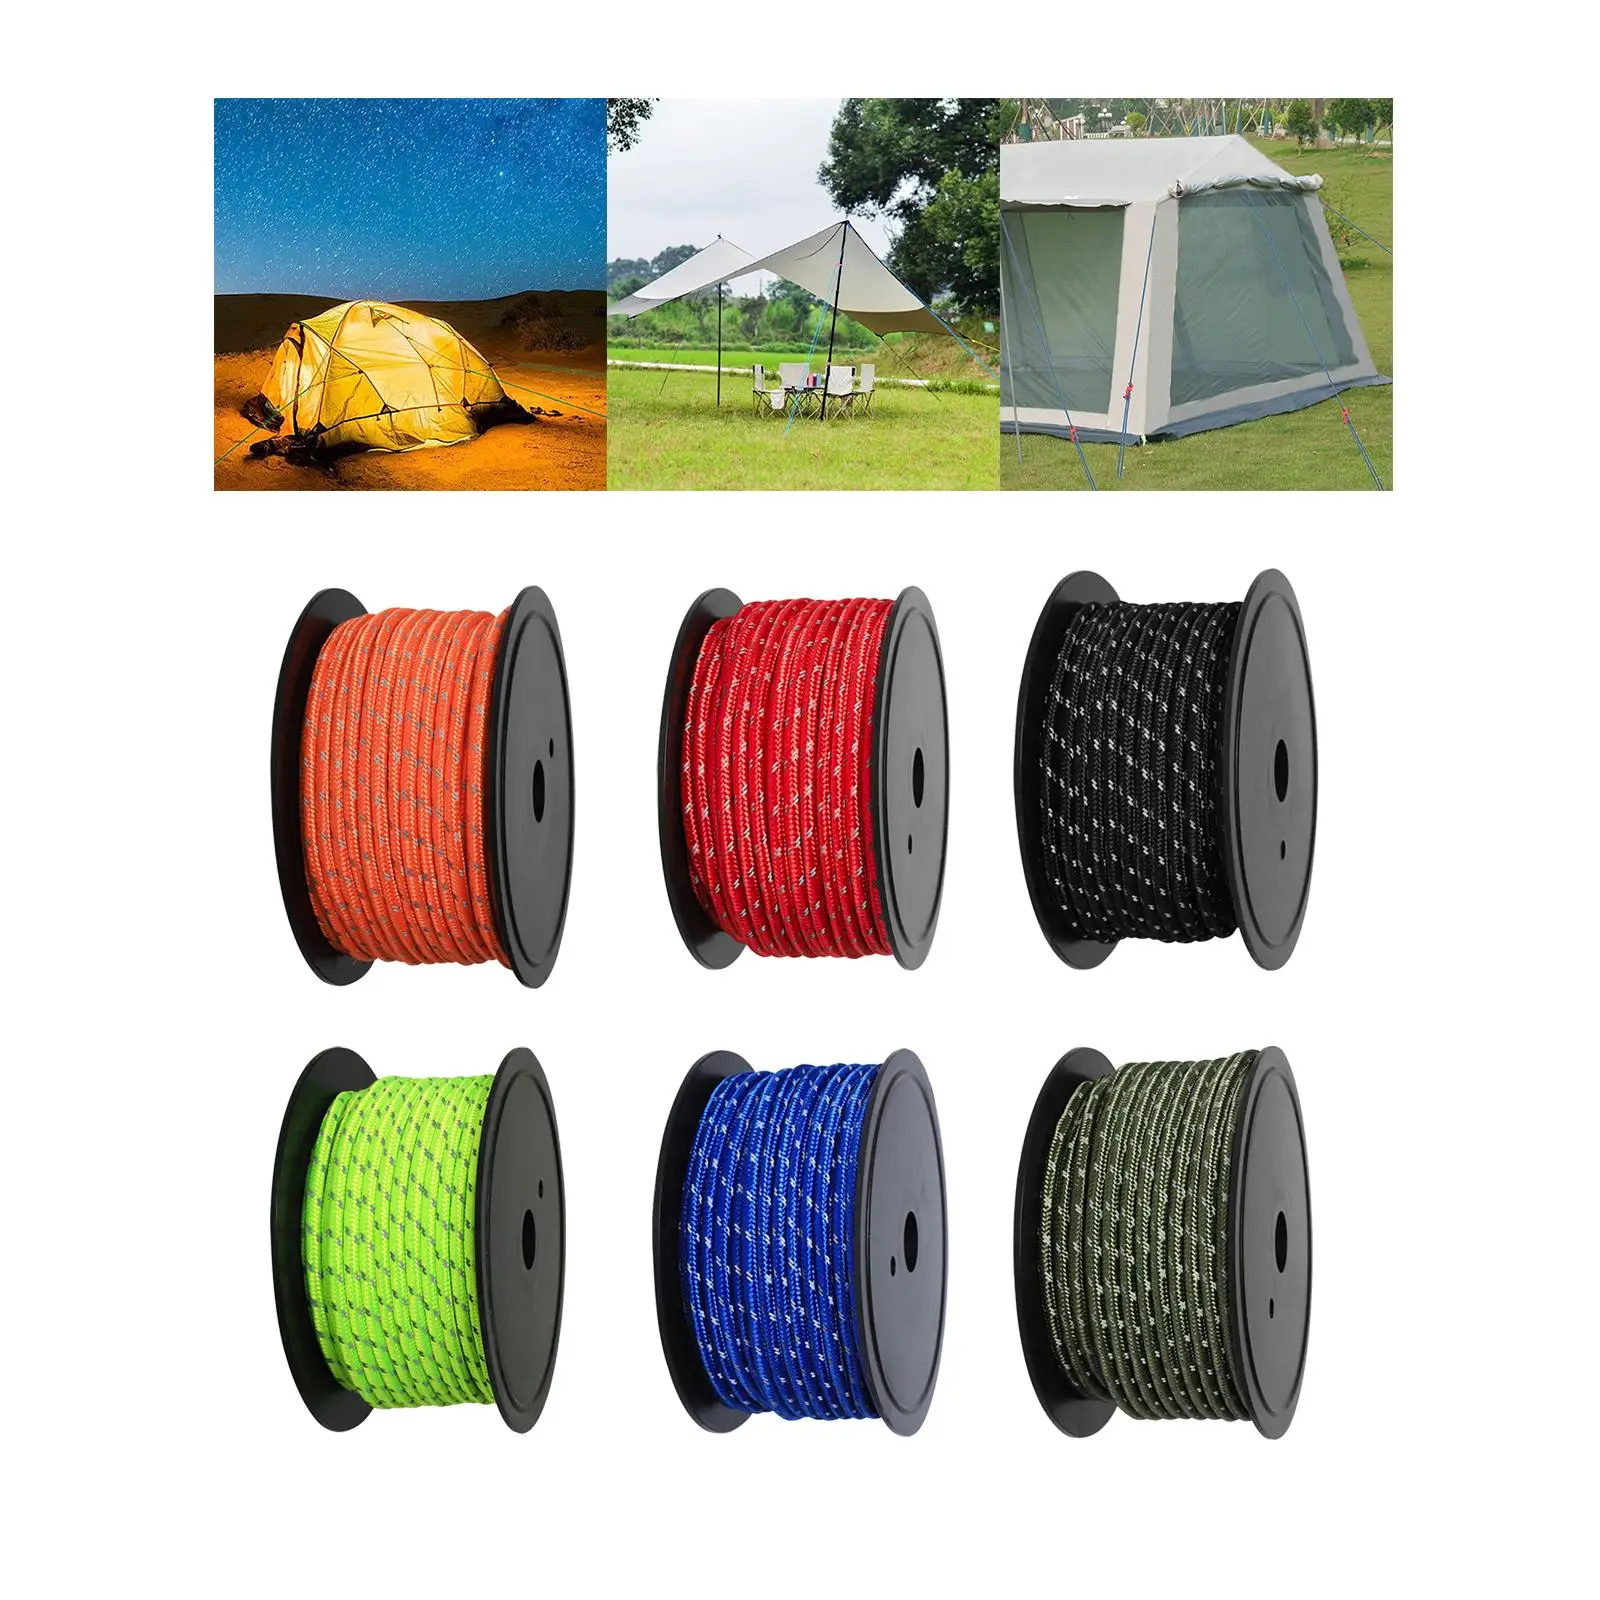 Camping 30M 6mm Reflective Tent Rope Guylines Tent Awning Guide Rope Glow in The Dark Luminous for Outdoor Travel Tent Accessory